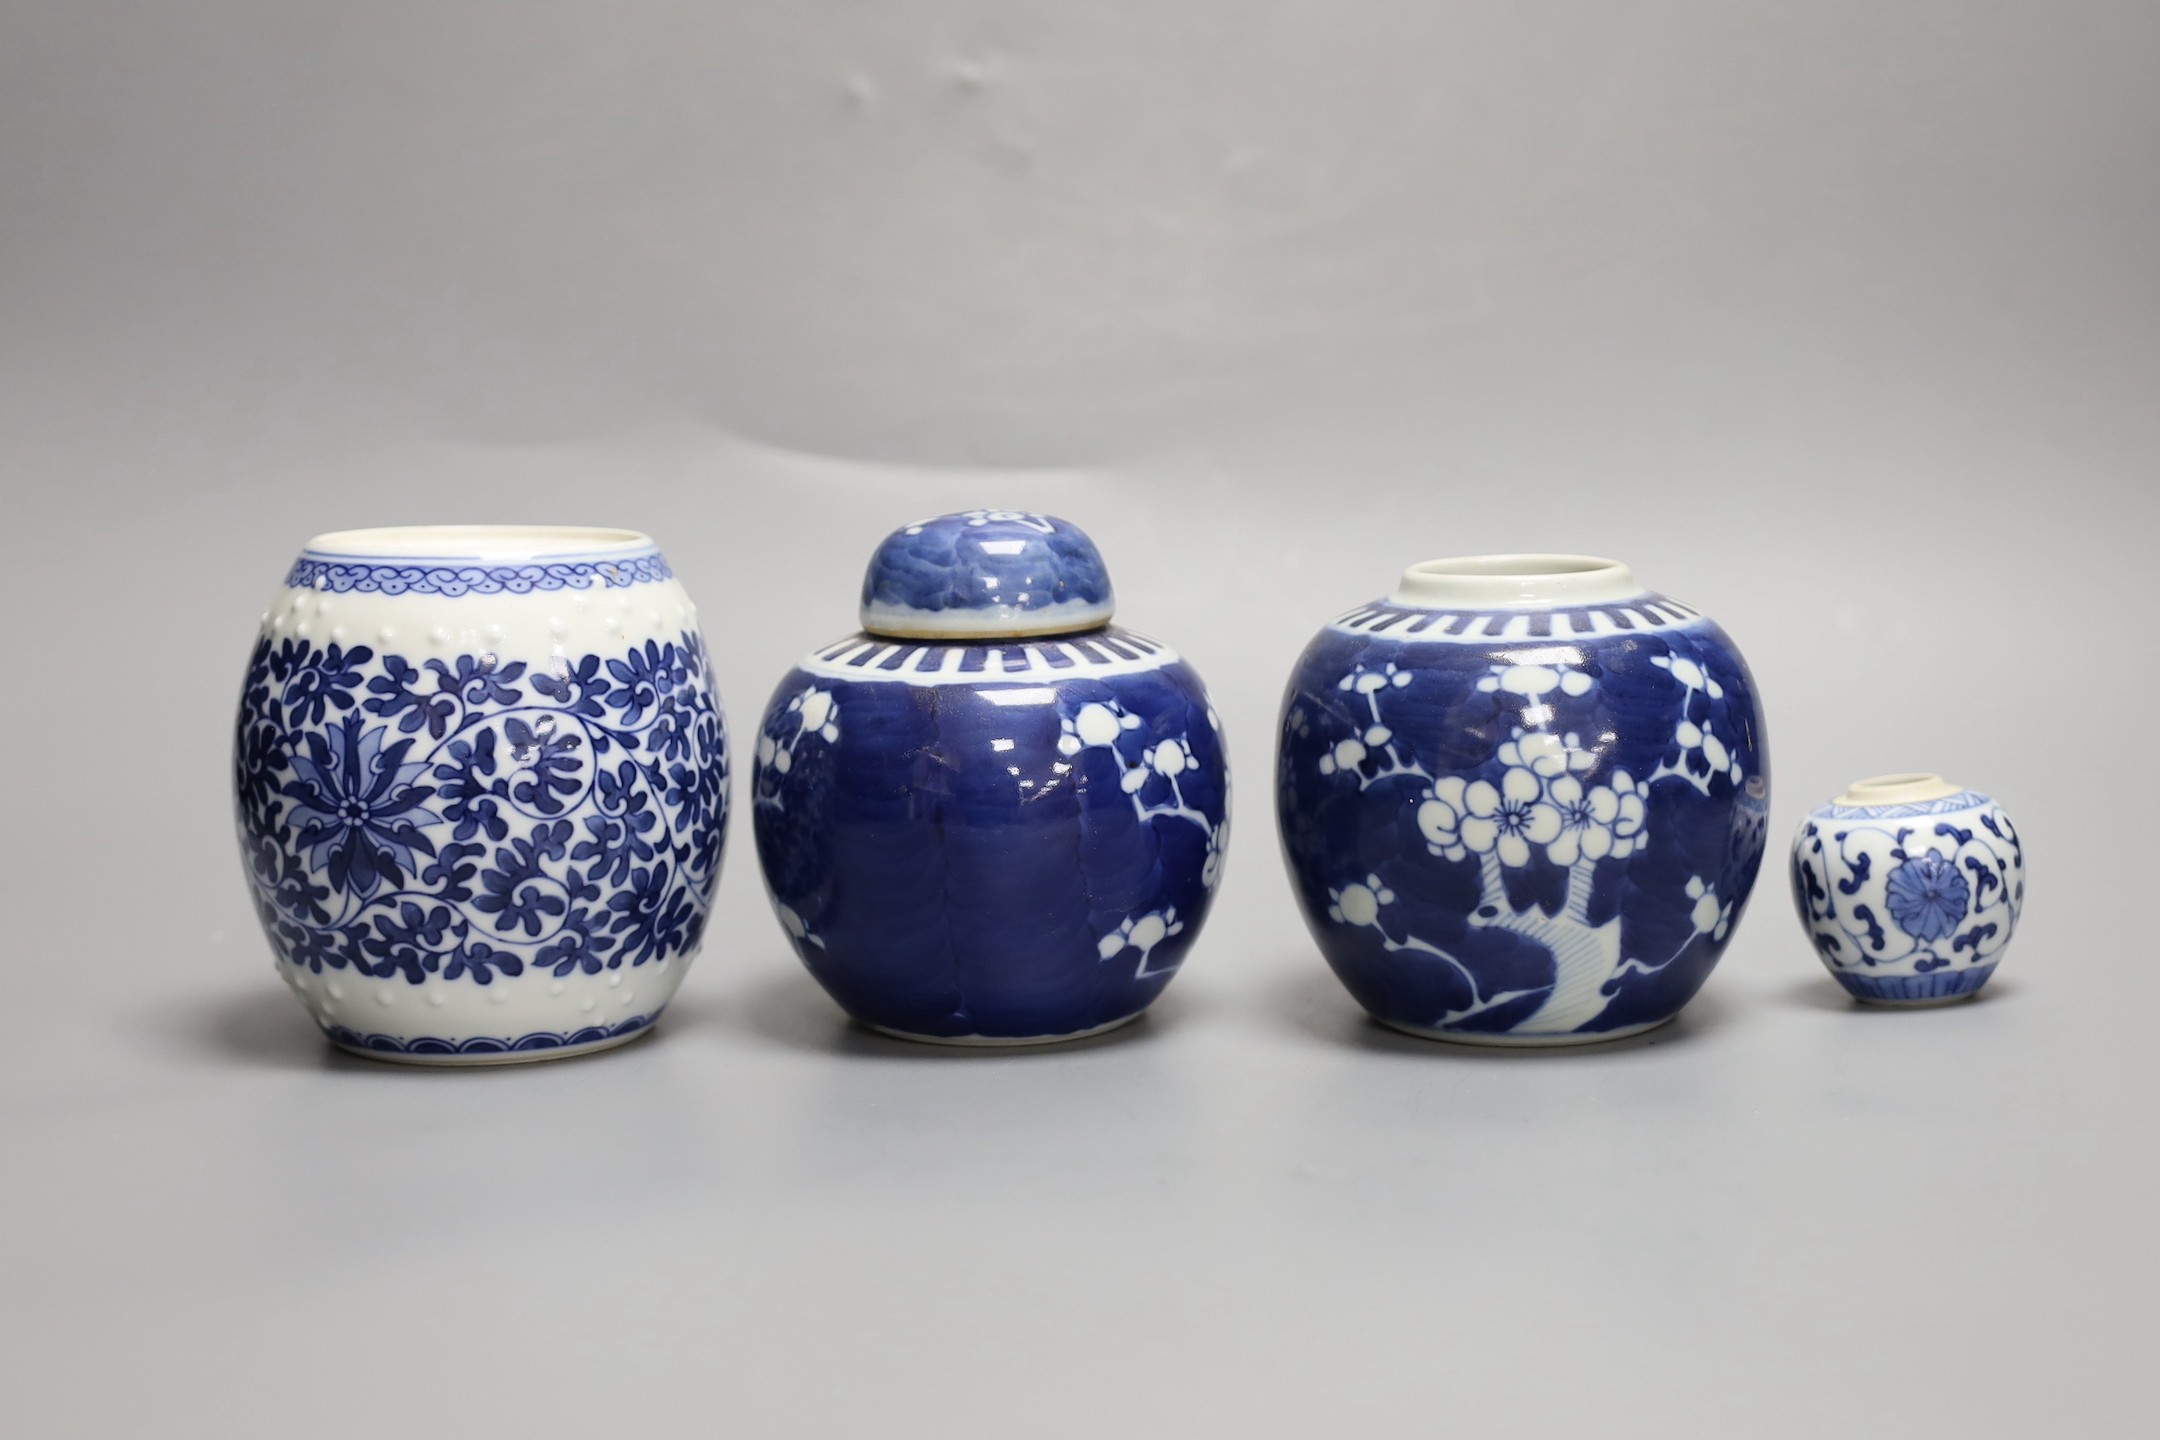 A pair of Chinese blue and white prunus jars, one with cover, a similar smaller jar and a ‘barrel’ jar